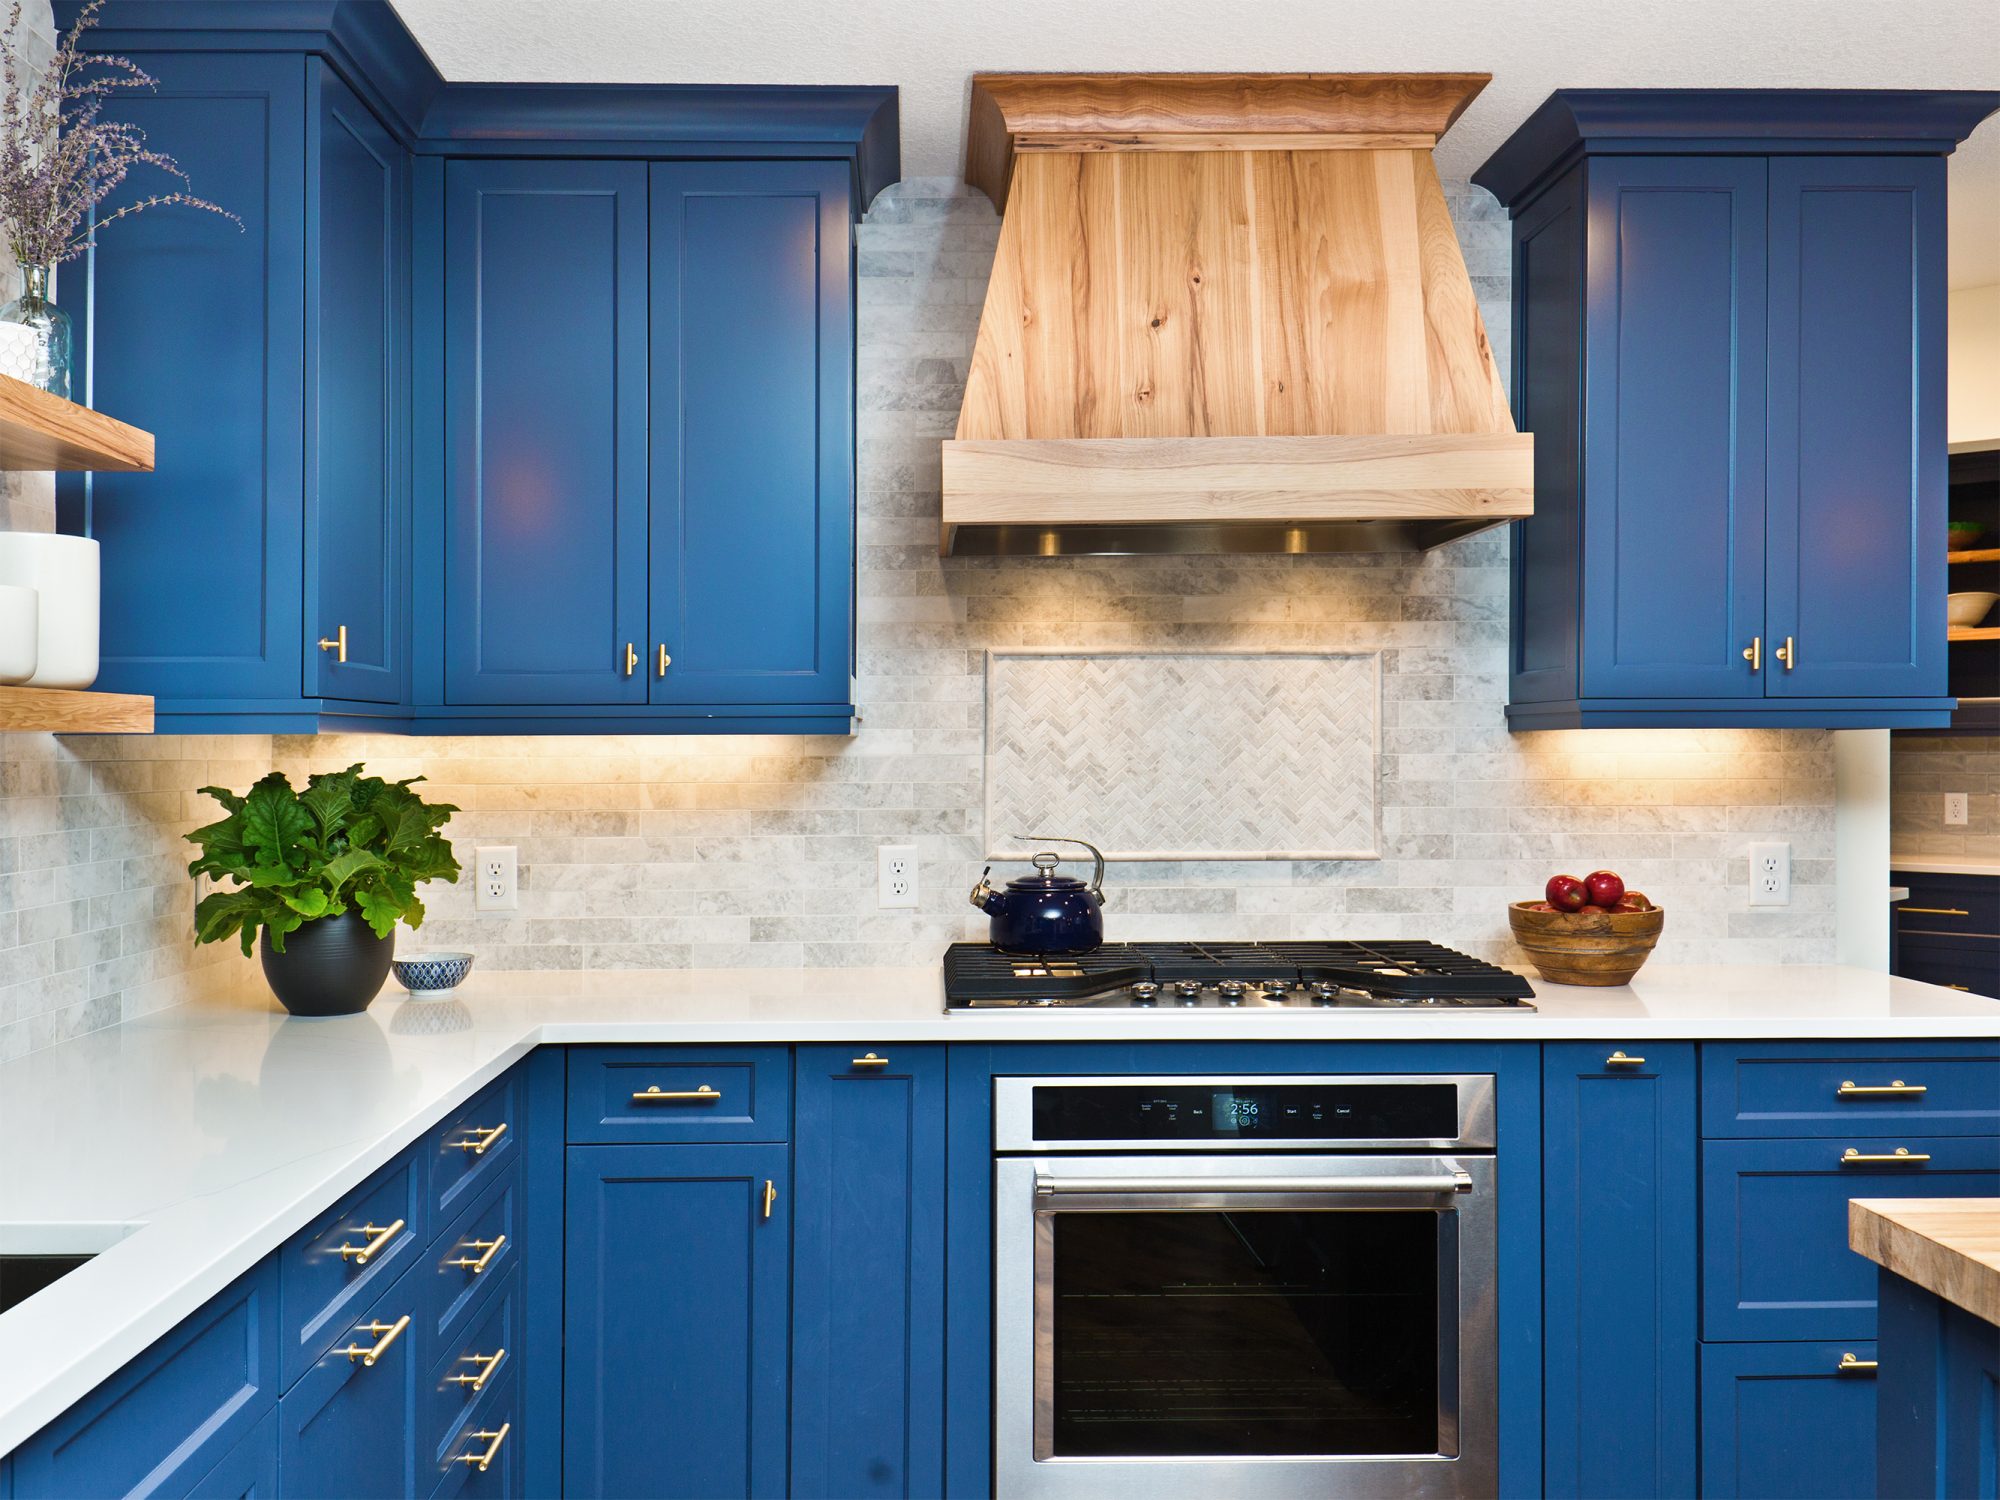 Kitchen Cabinets: How to Ensure They Are High-Quality?